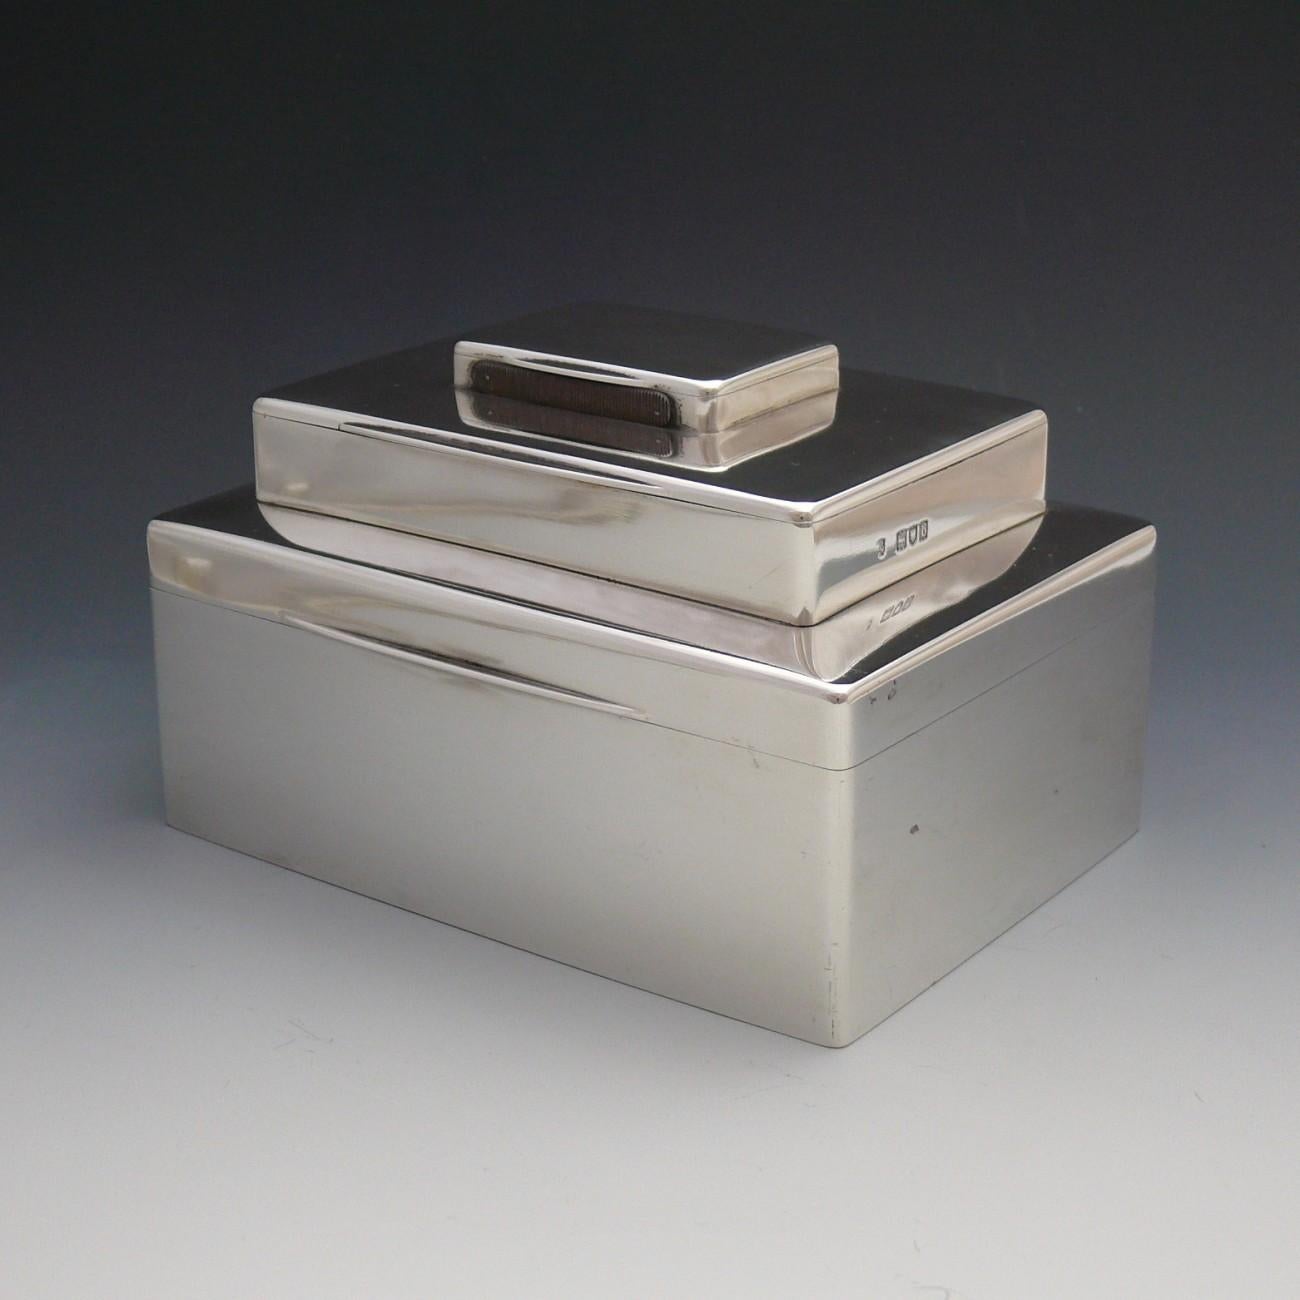 A stylish Sterling silver box made to house cigars, cigarettes and matches, each in their own separate compartment. Made in hallmarked silver; London 1897 and with the cigar compartment lined in cedar.

Dimensions: 14.5 cm/5¾ (width) x 10.5 cm/4⅛